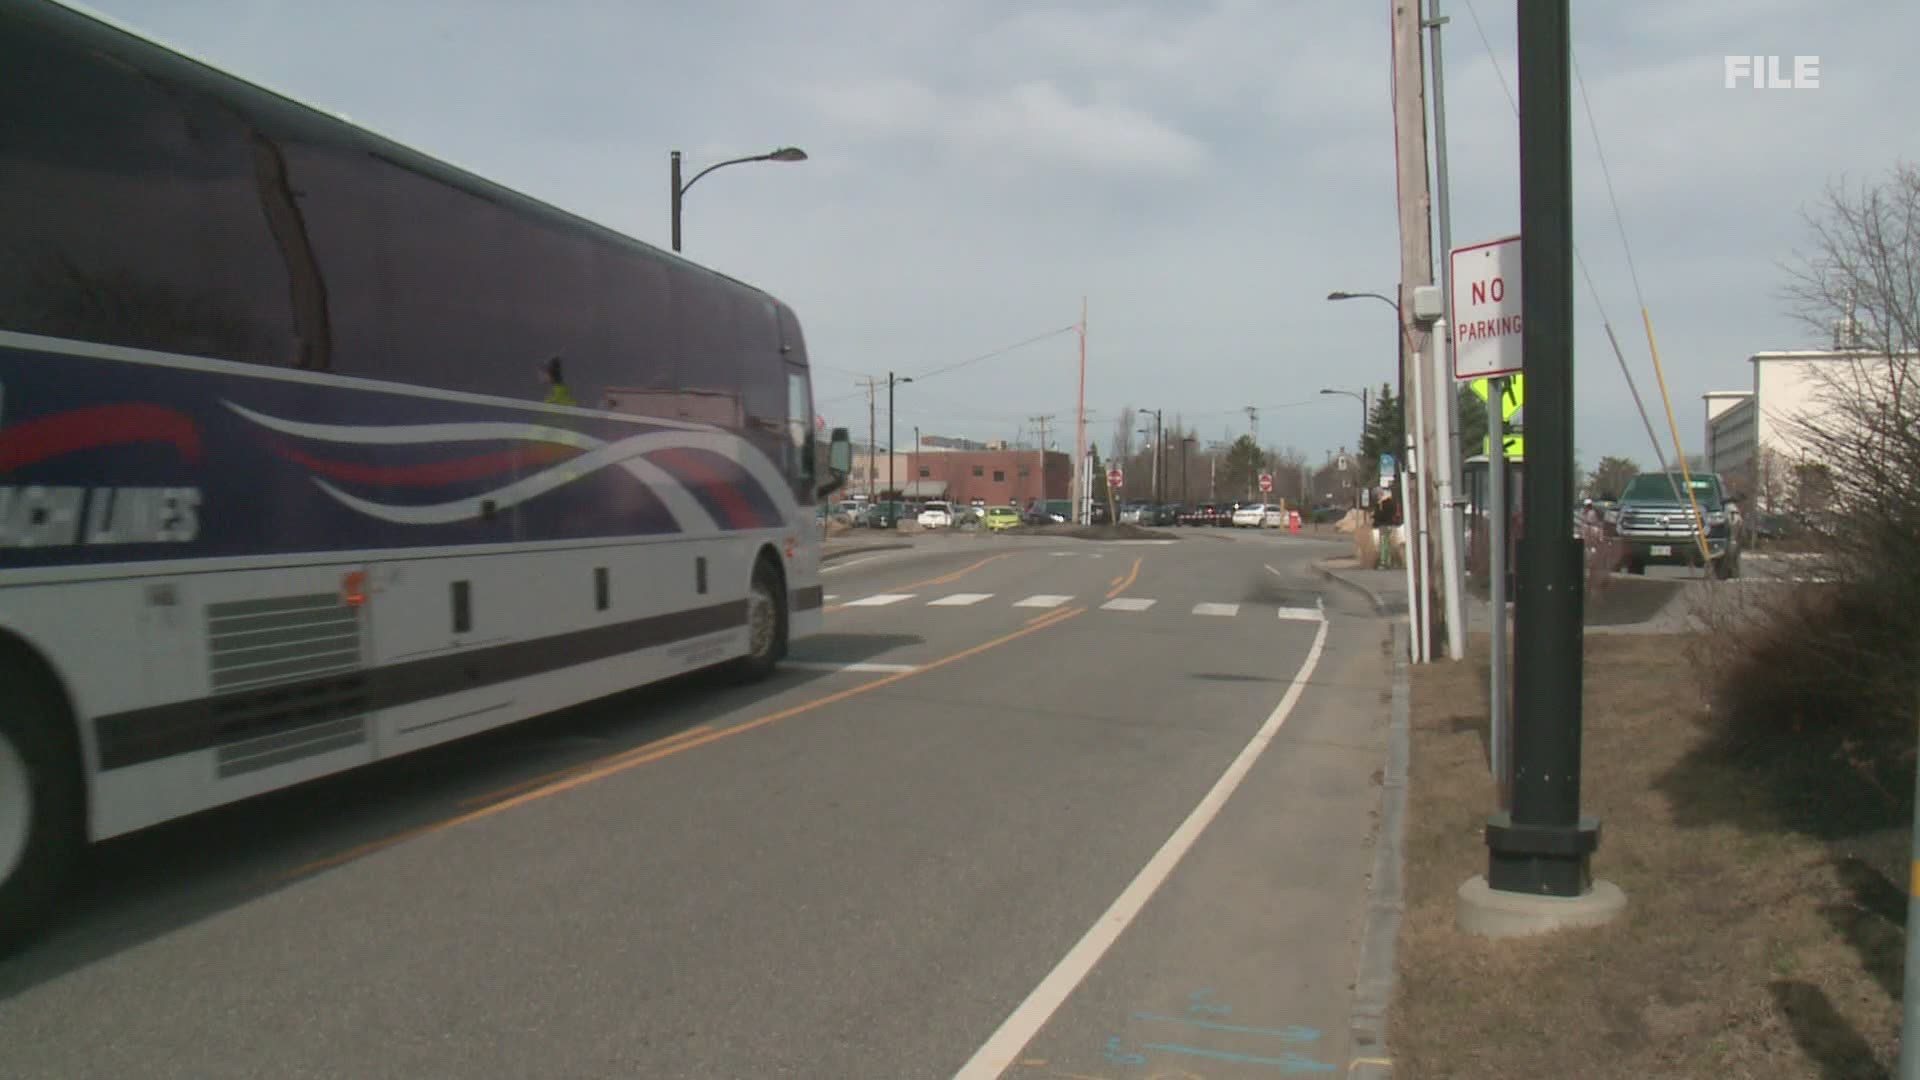 Transportation services in Maine to resume with new safety measures